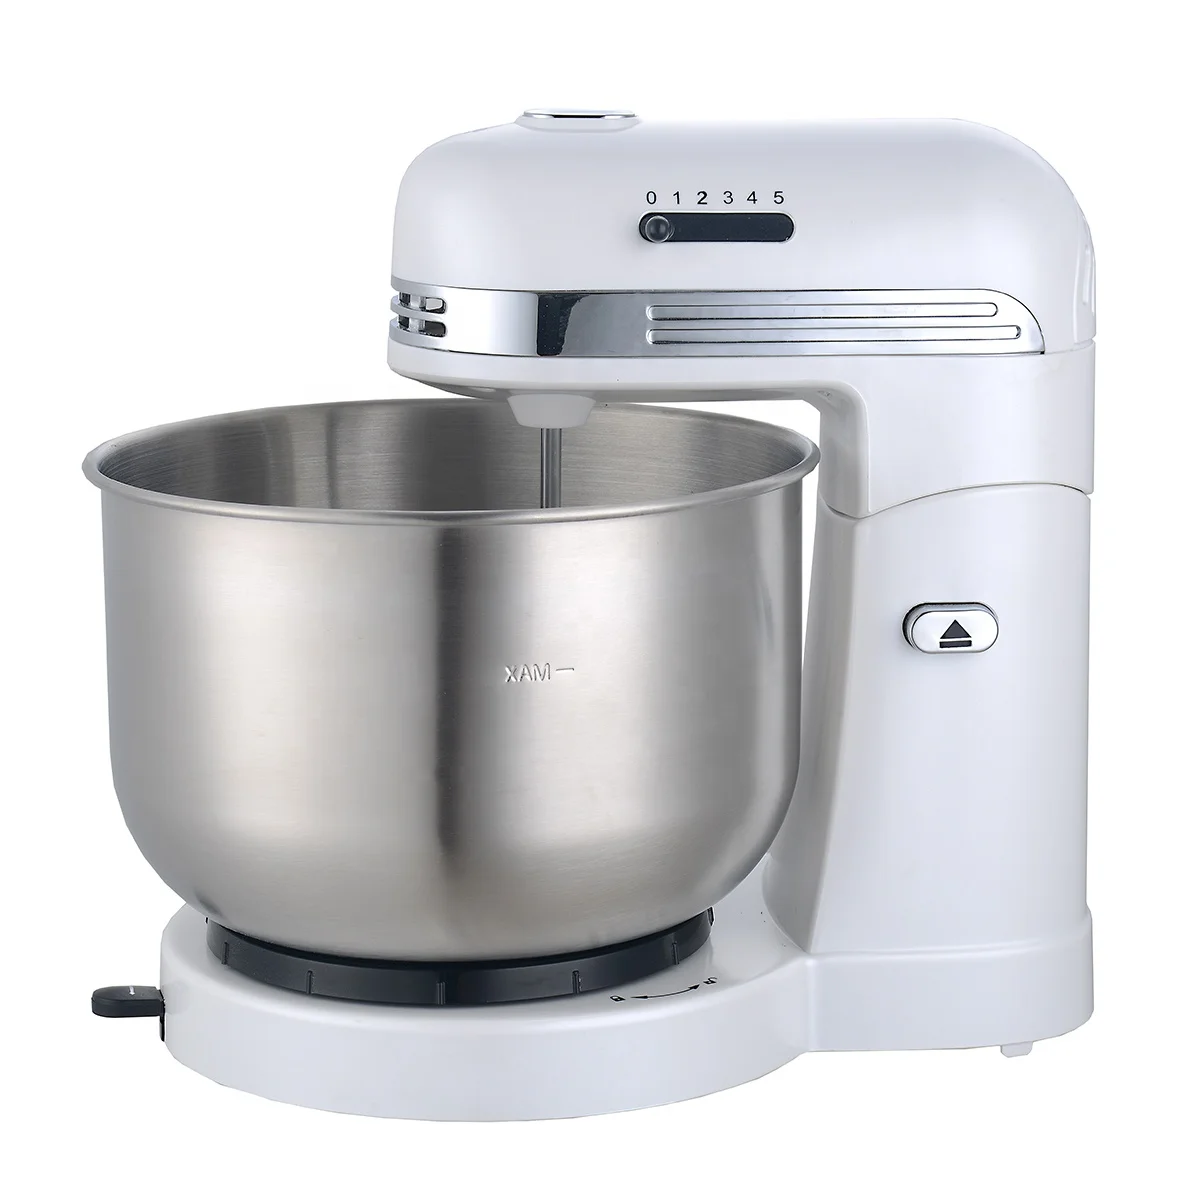 Cheap Entry Level 3.5l Small Capacity Dough Food Mixer Hand Mixer Bowl - Buy 3.5l Small Capacity Small Iter,Cheap Stand Mixer Product on Alibaba.com